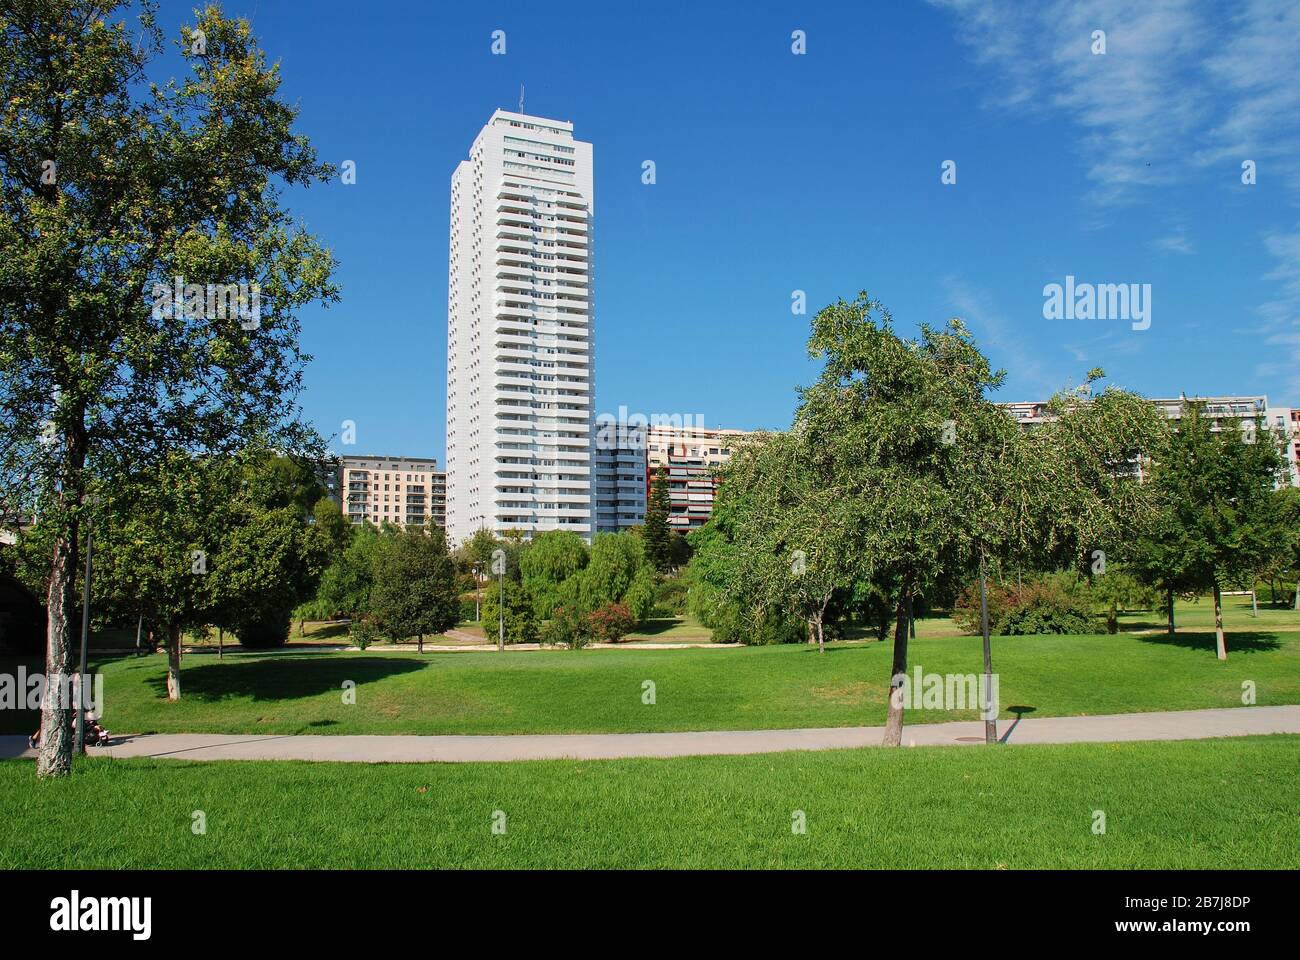 Paths at the coastal end of the Turia river park in Valencia, Spain on September 5, 2019. Stock Photo